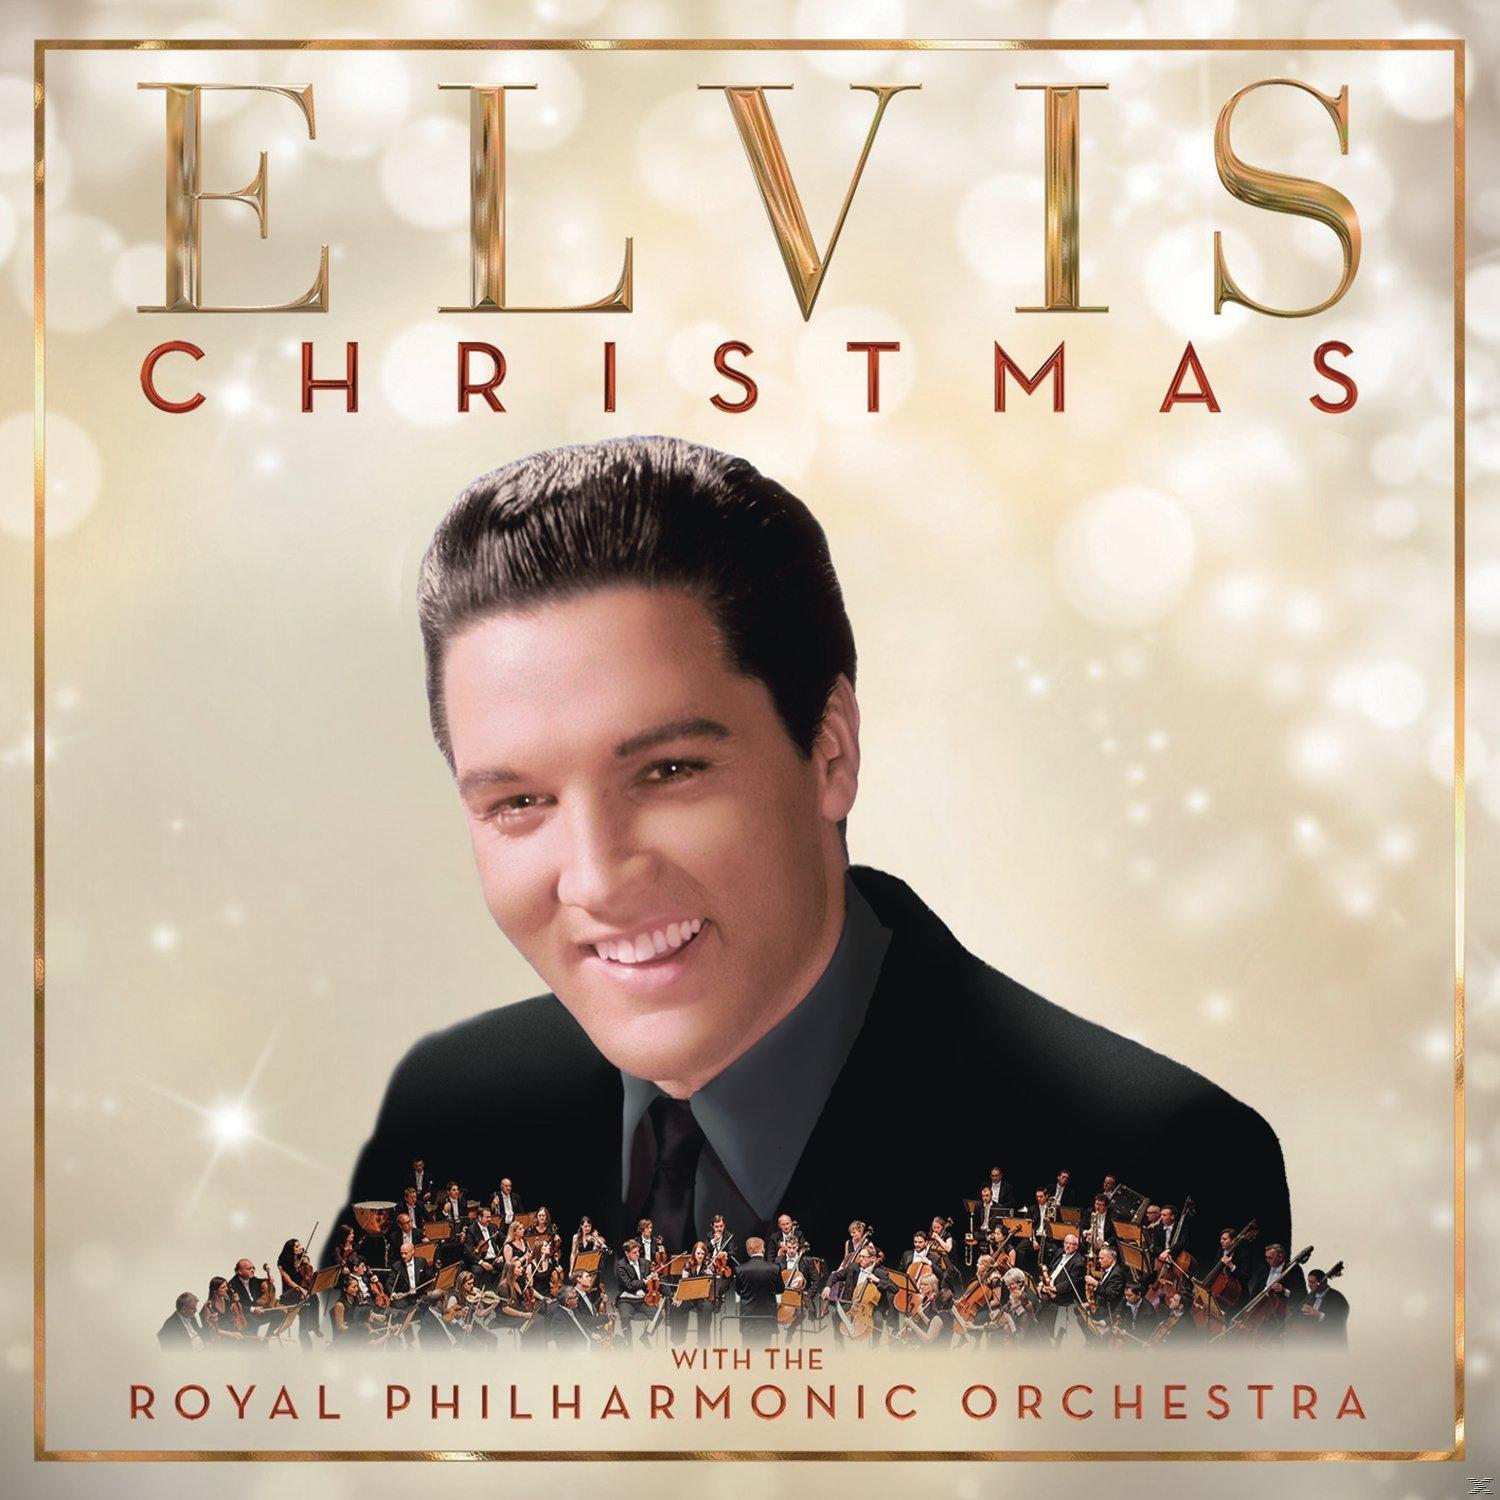 - Royal Elvis Elvis Christmas and the Philharmonic with Or Royal - Orchestra Presley, (Vinyl) Philharmonic